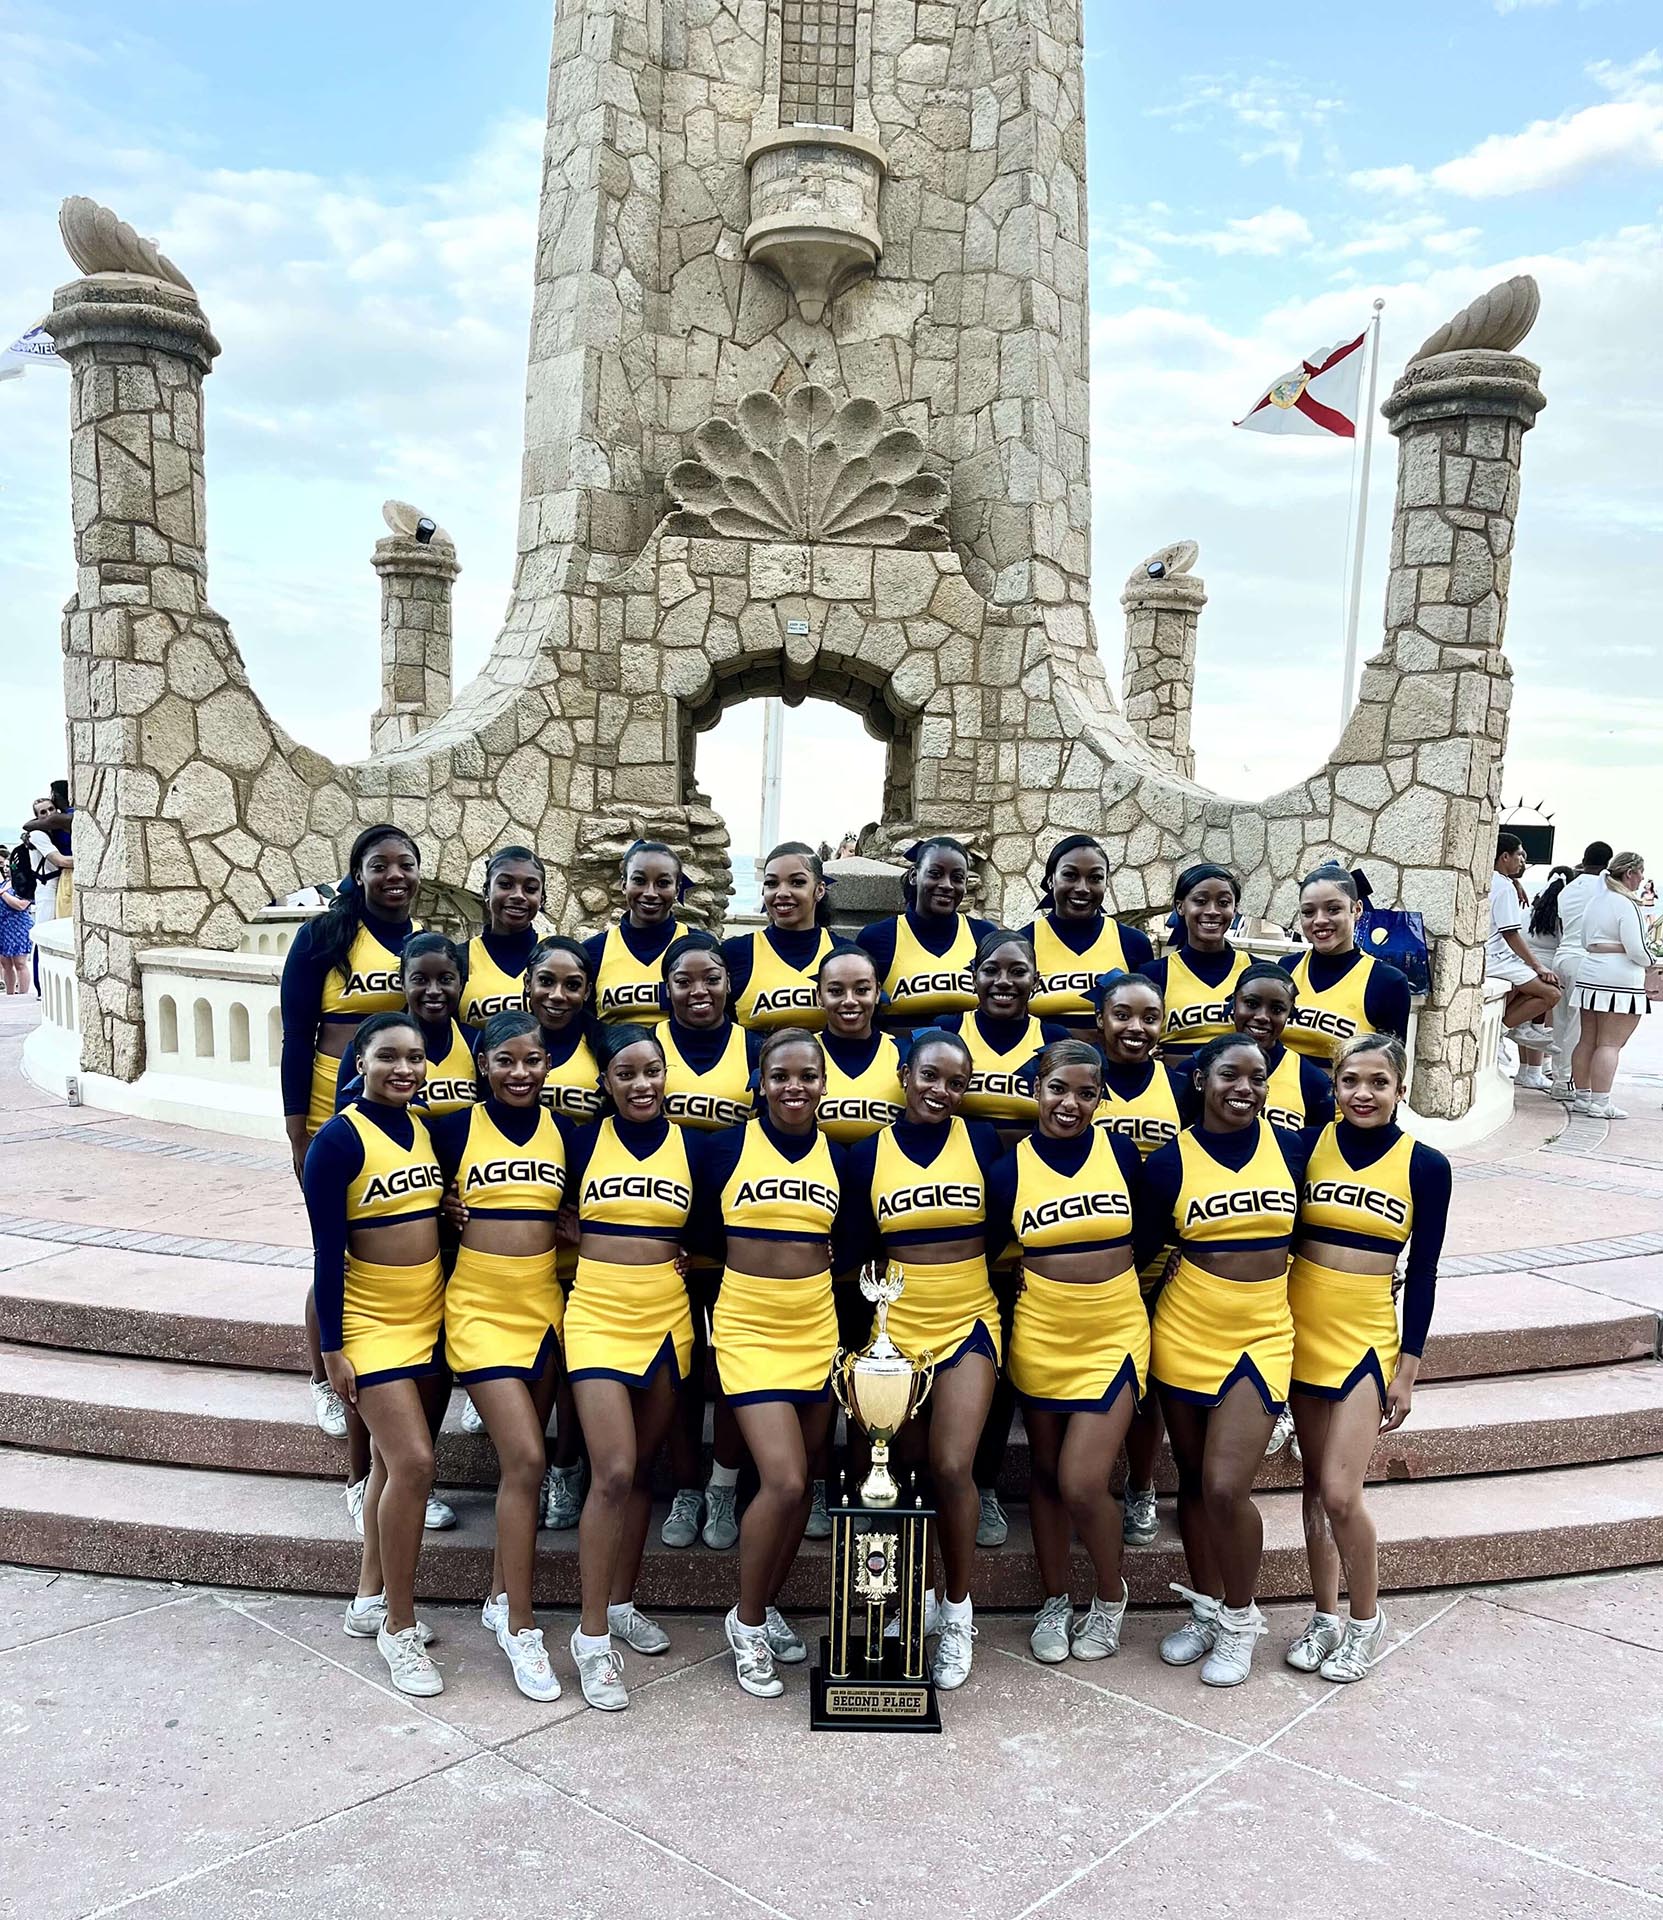 Aggie cheerleaders pose with trophy